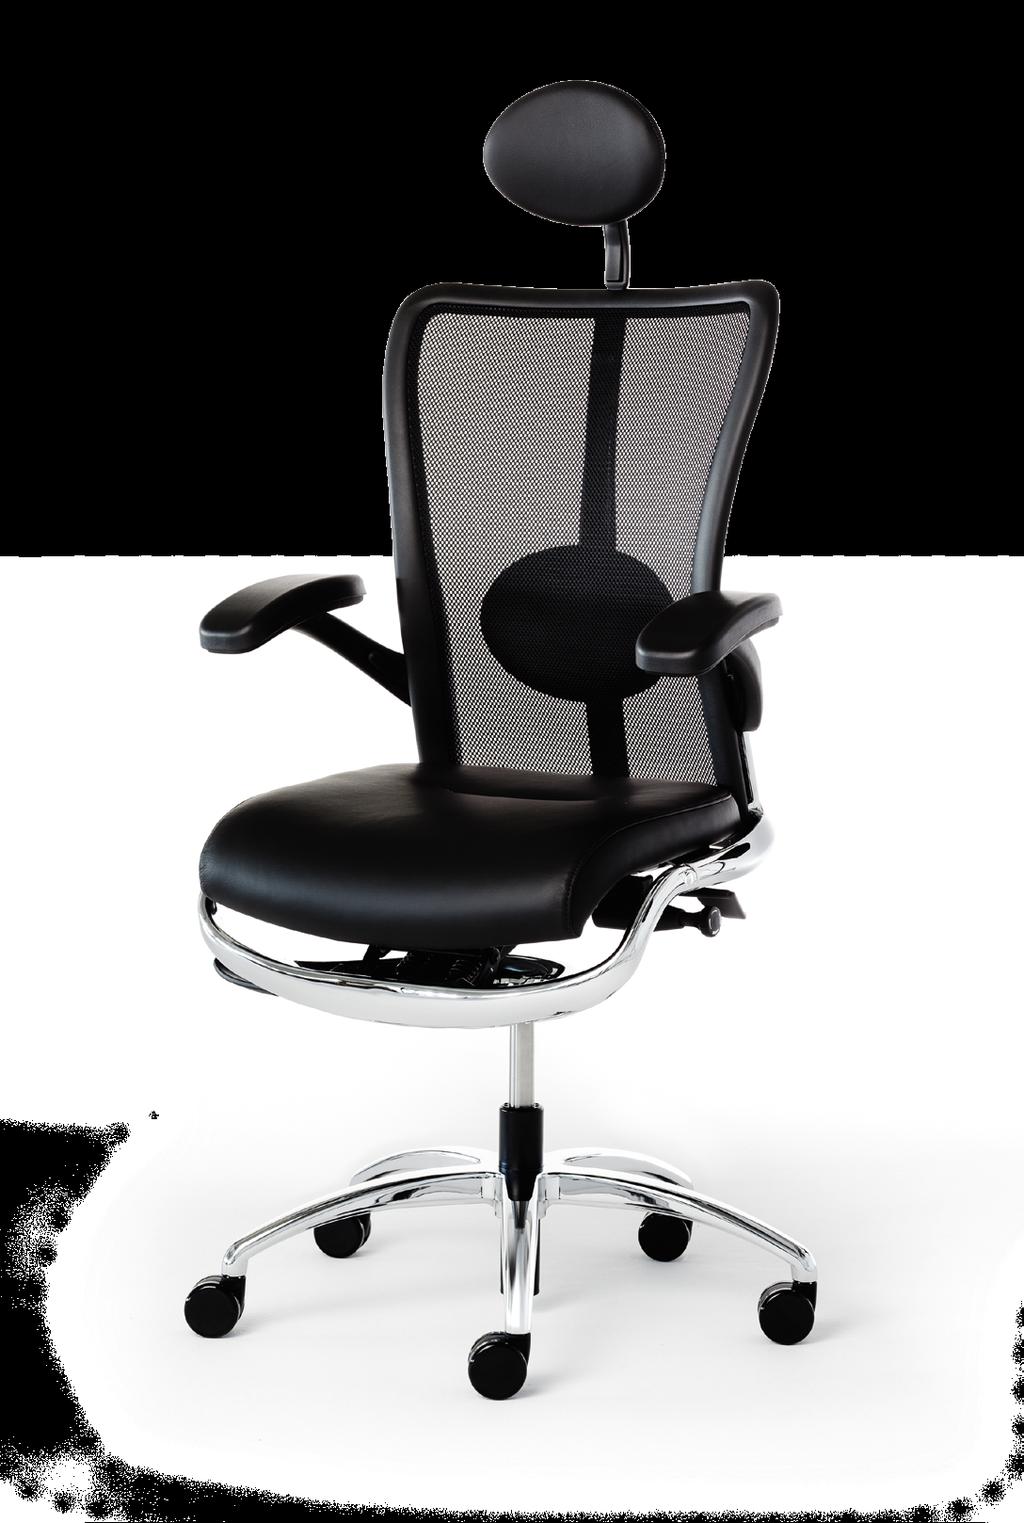 THE SKYE MANAGEMENT CHAIR GIVES YOU THE SCOPE TO LIE BACK AND RELAX, STOP FOR A FEW MOMENTS AND LET YOUR